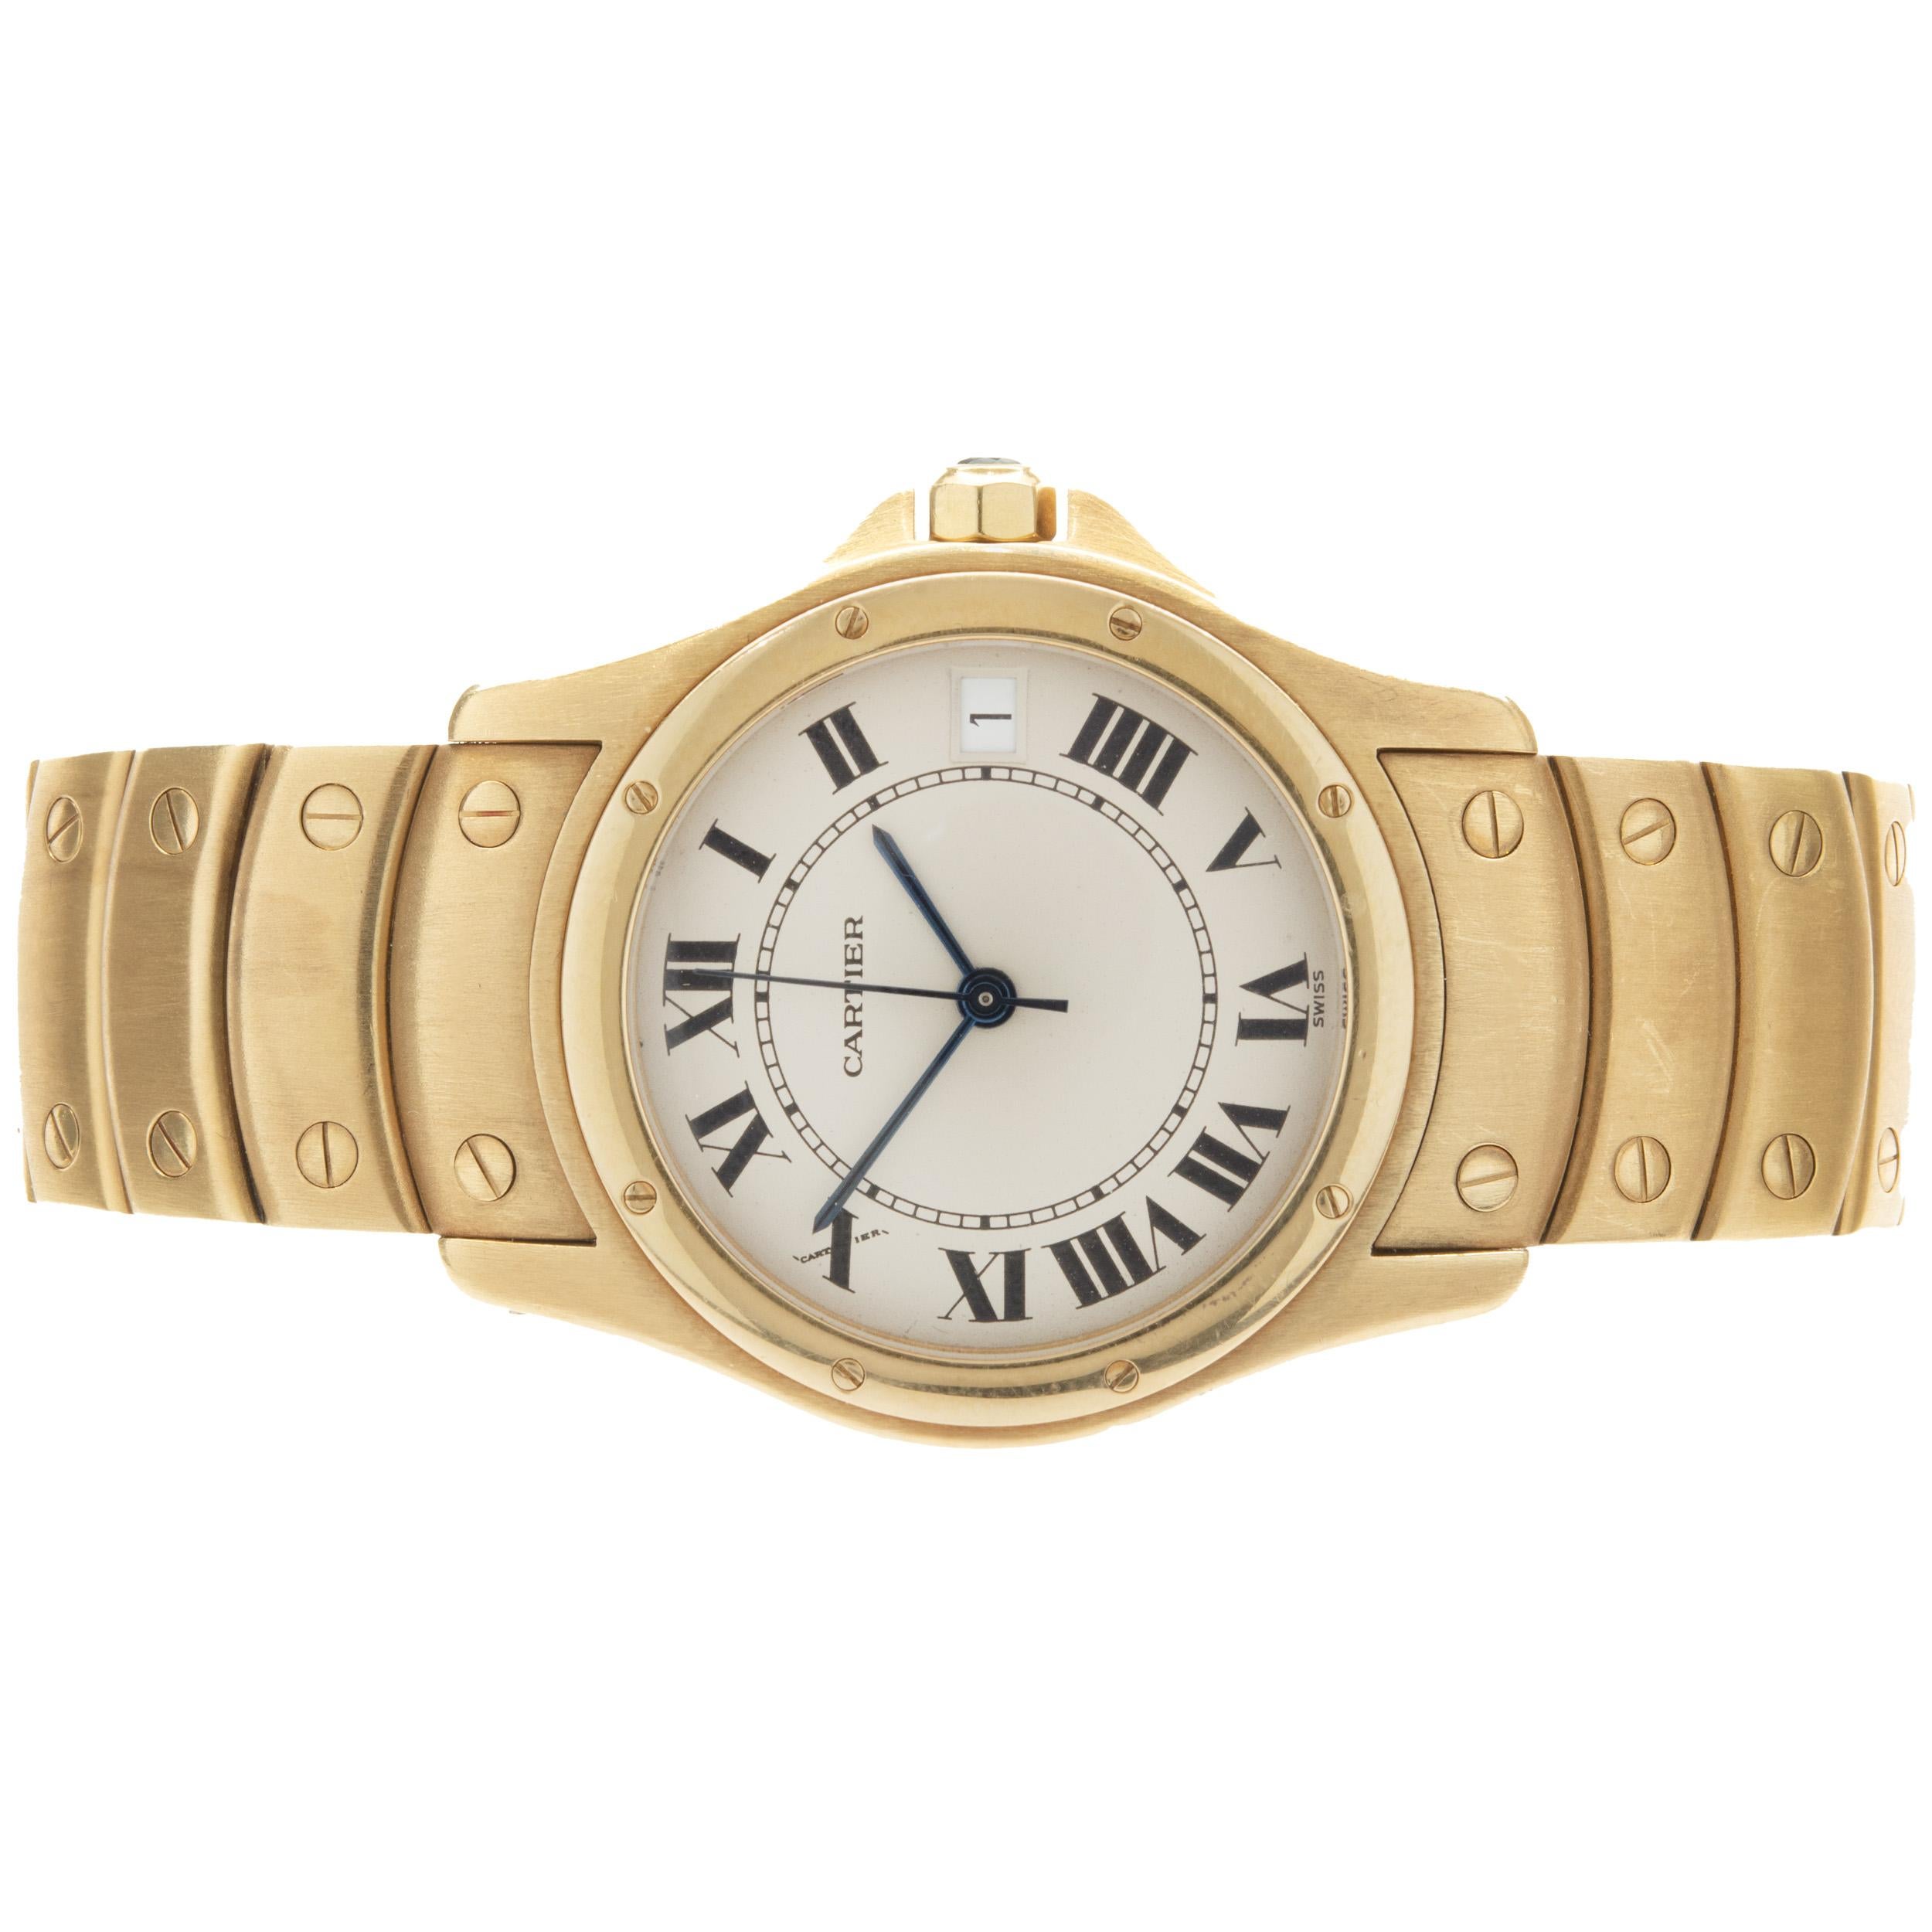 Movement: automatic
Function: hours, minutes, seconds, date
Case: 36mm 18K yellow gold round case, push pull crown, sapphire crystal
Dial: white roman dial, steel sword sweeping hands
Band: Cartier 18K yellow gold Santos bracelet, fold over